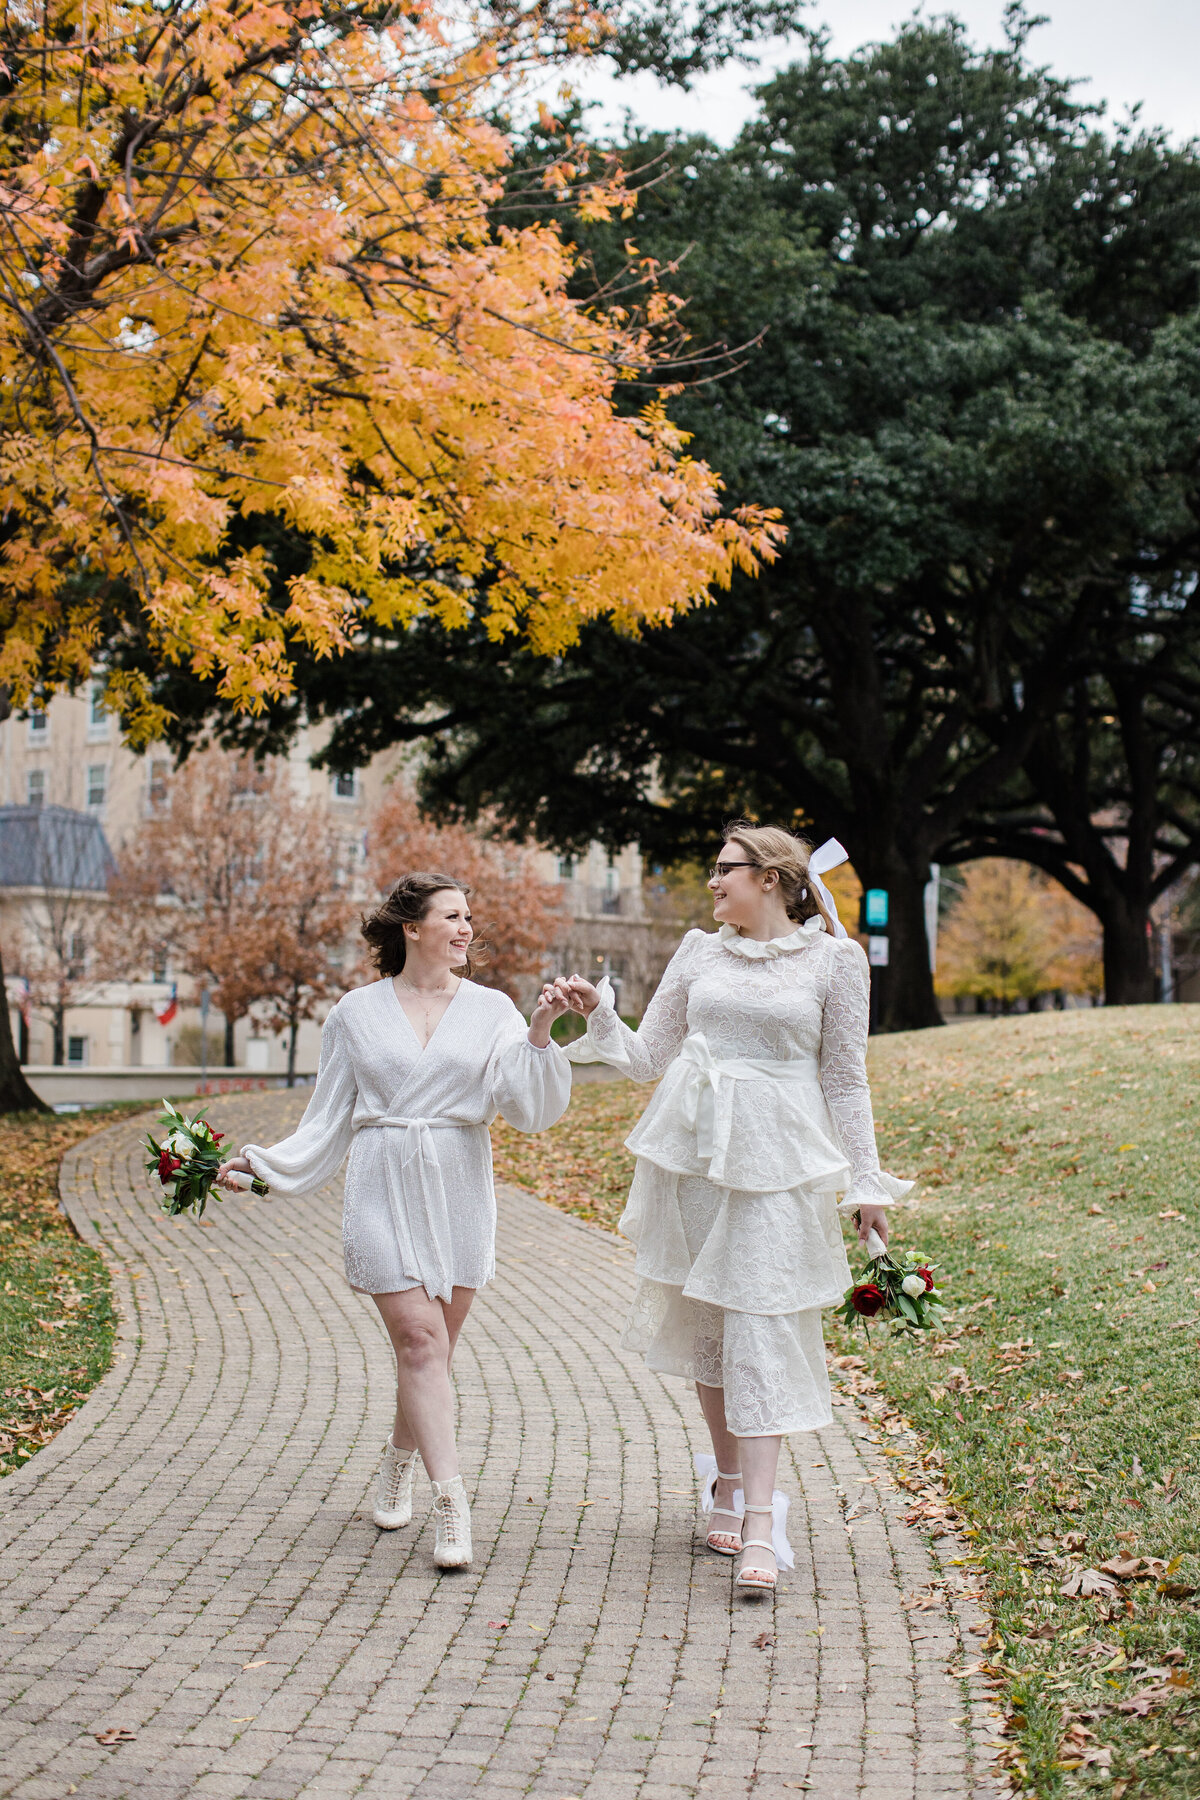 A portrait of two brides walking hand in hand down a path after their elopement ceremony at Turtle Creek in Dallas, Texas. The bride on the left is wearing a simple, elegant, short white dress while holding a bouquet. The bride on the right is wearing a layered, intricate, white dress also while holding a bouquet.